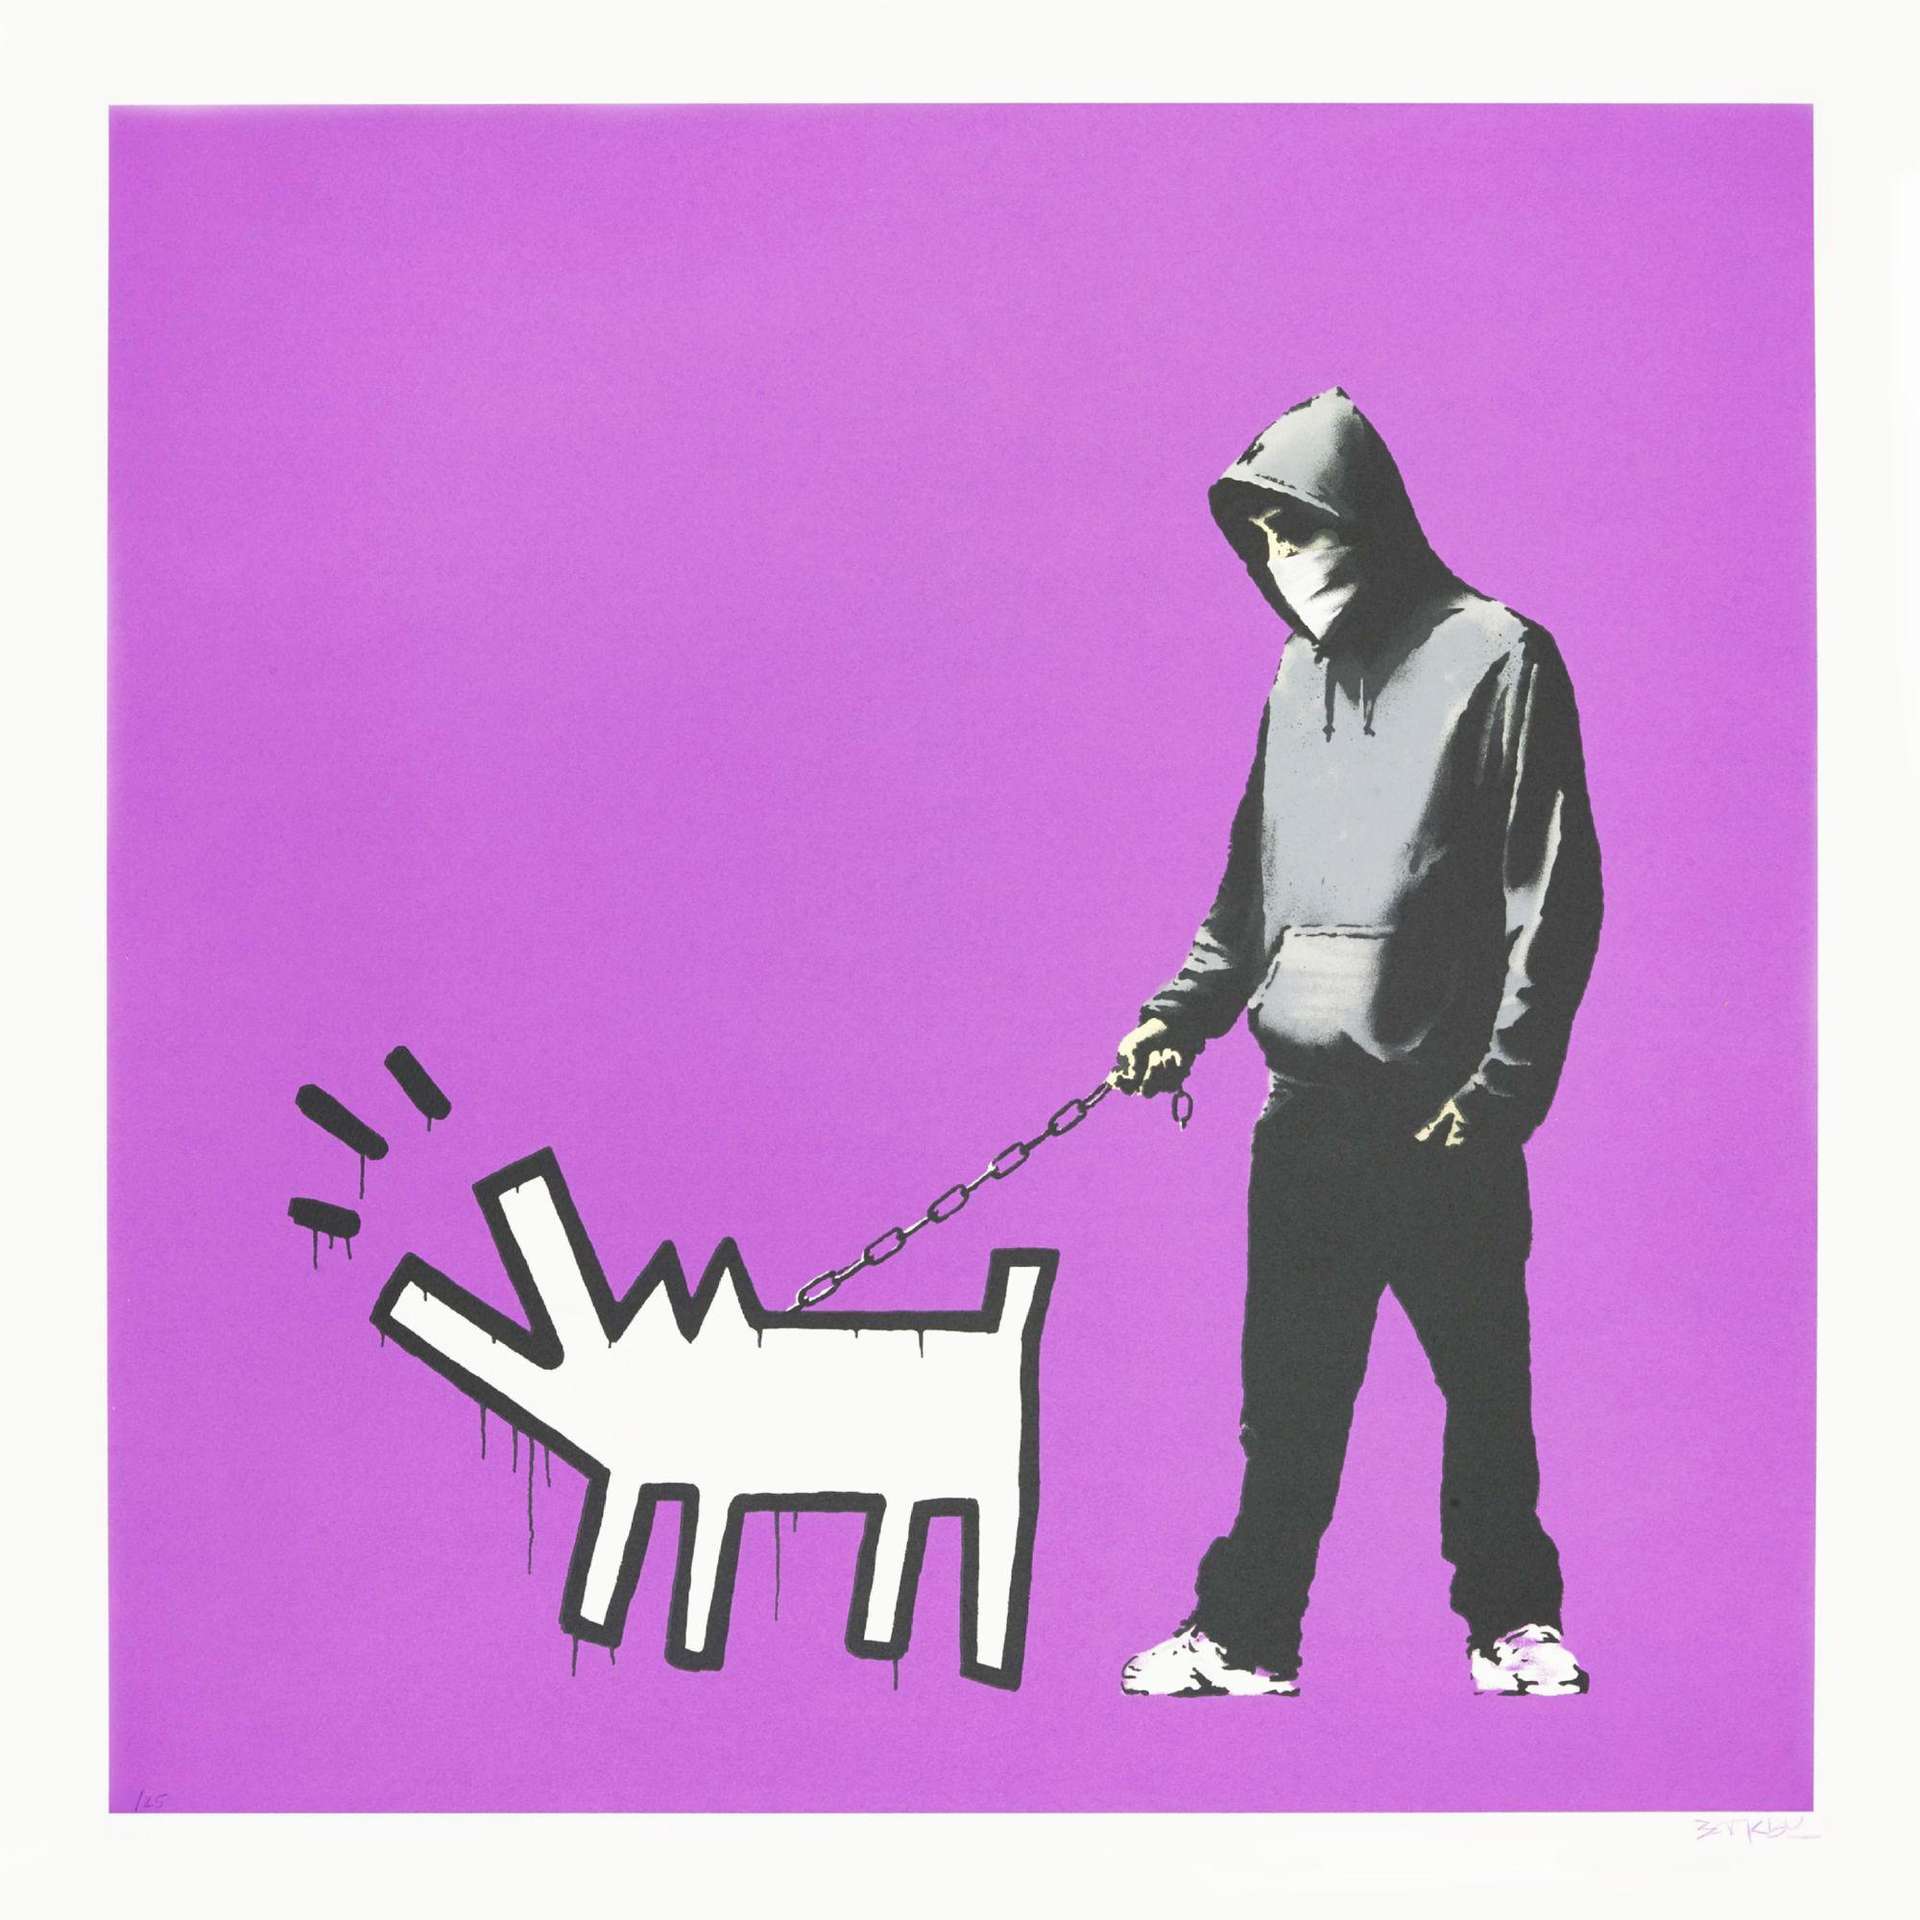 Choose Your Weapon (bright purple) - Signed Print by Banksy 2010 - MyArtBroker